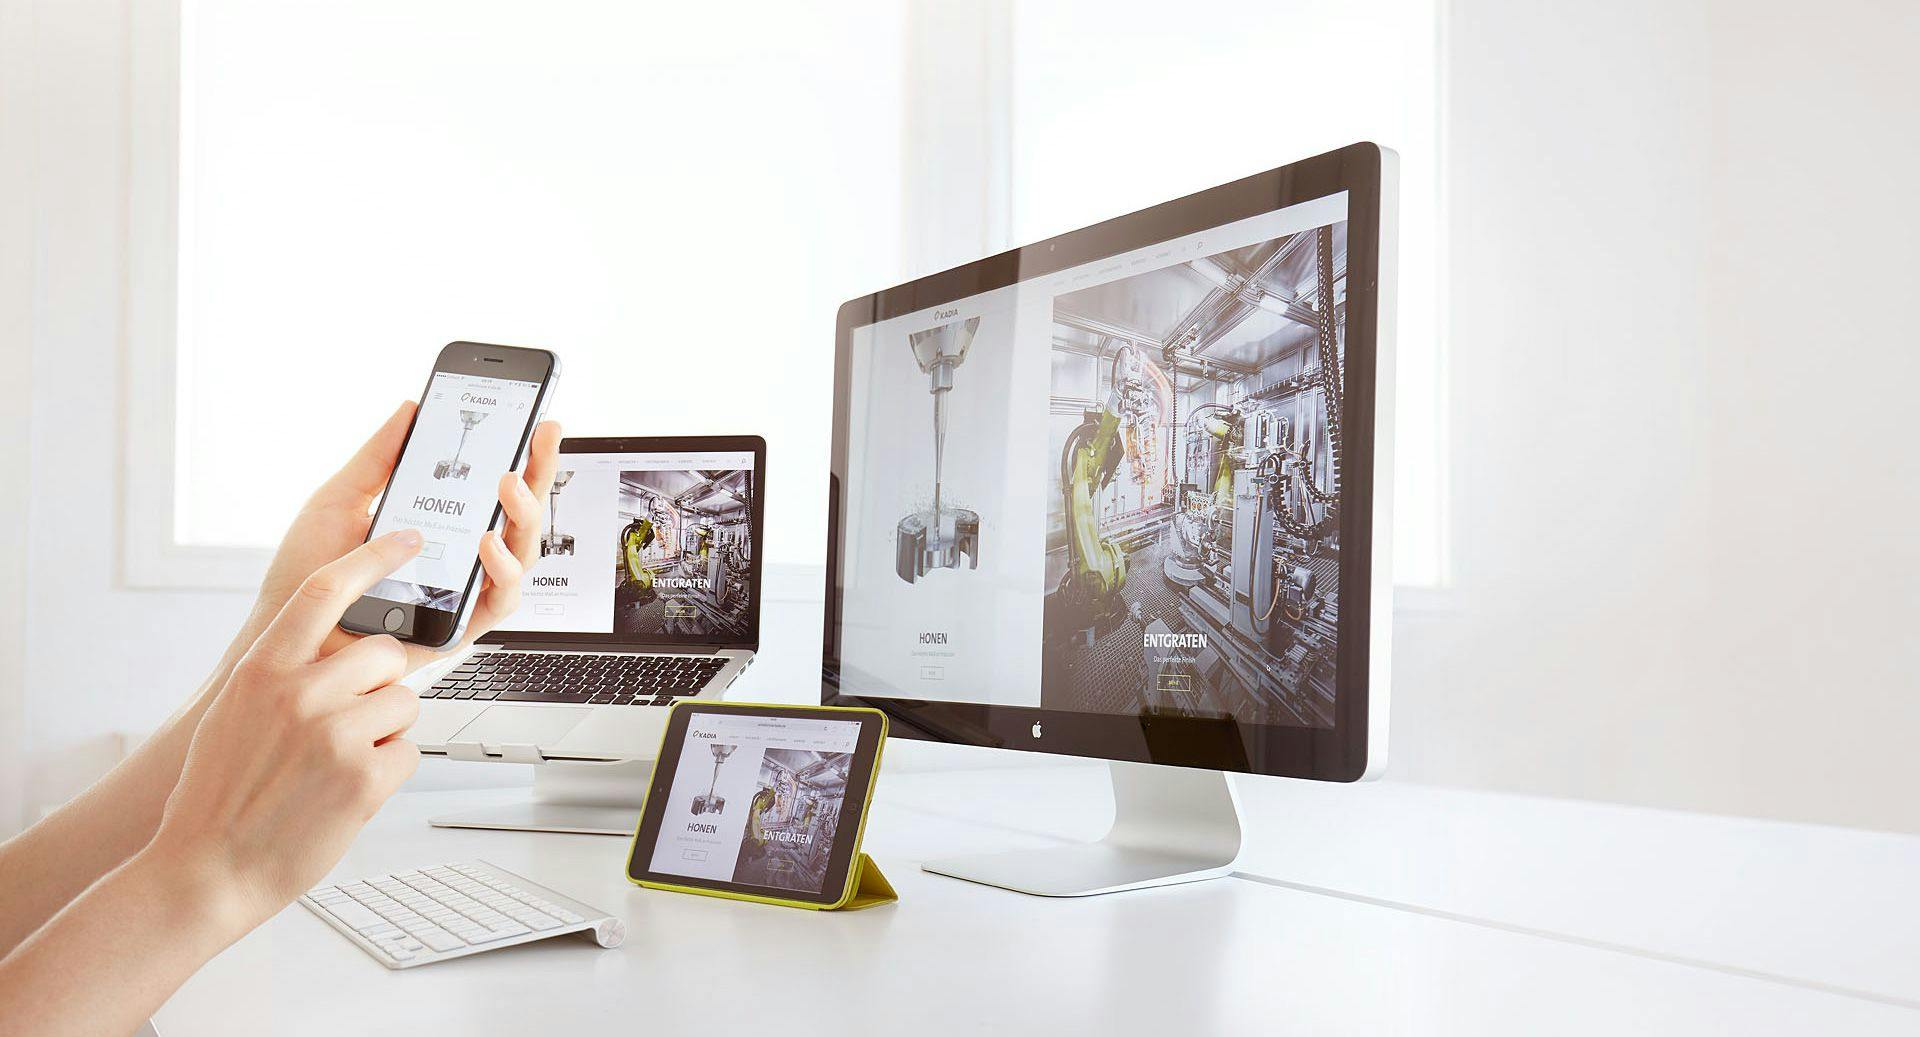 Image with different devices and the KADIA Website